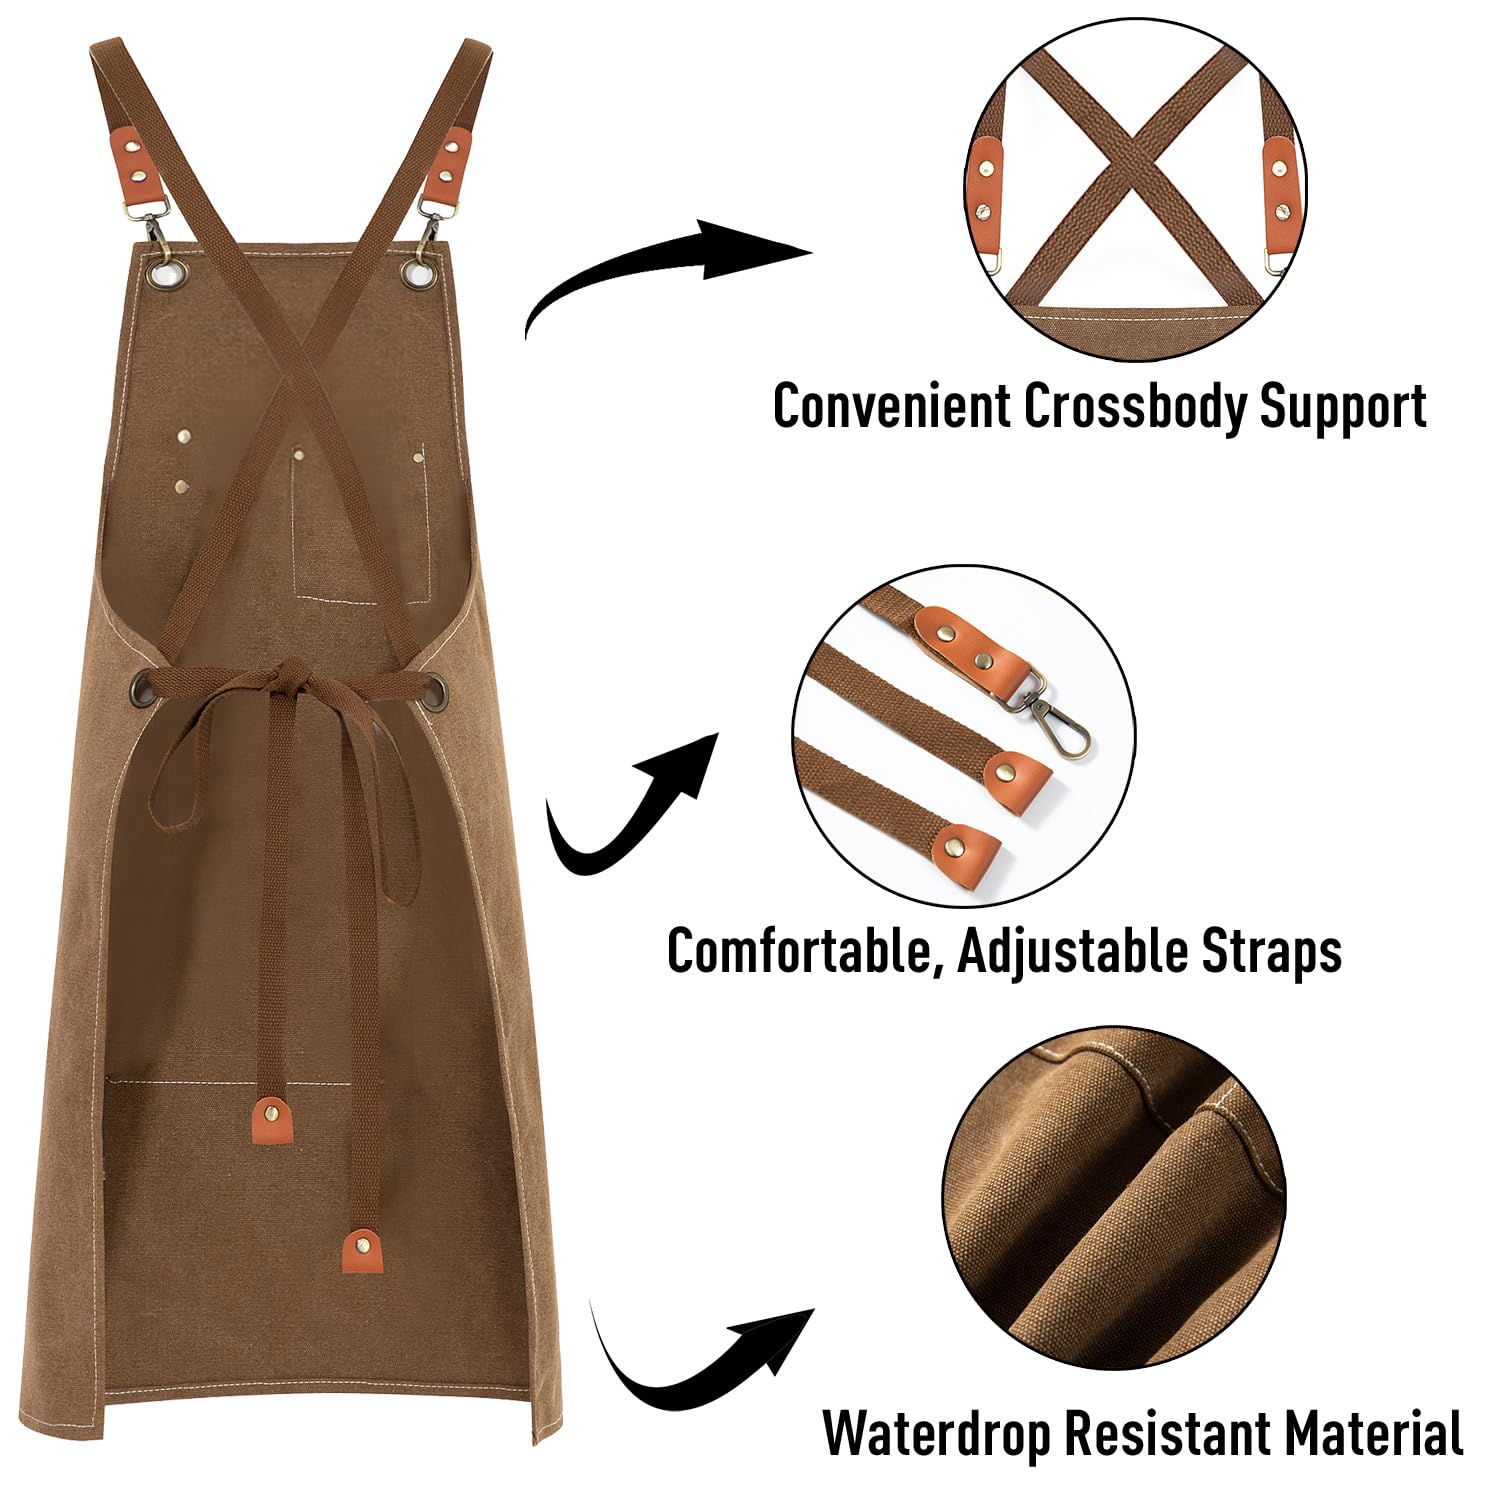 NOBONDO Canvas Apron with Pockets for Men and Women - Cross Back Kitchen Apron with Crossbody Support, Shop Utility Bib for Work, Chef Cooking, Baking, Hair Stylist, Barista, Bartender, BBQ